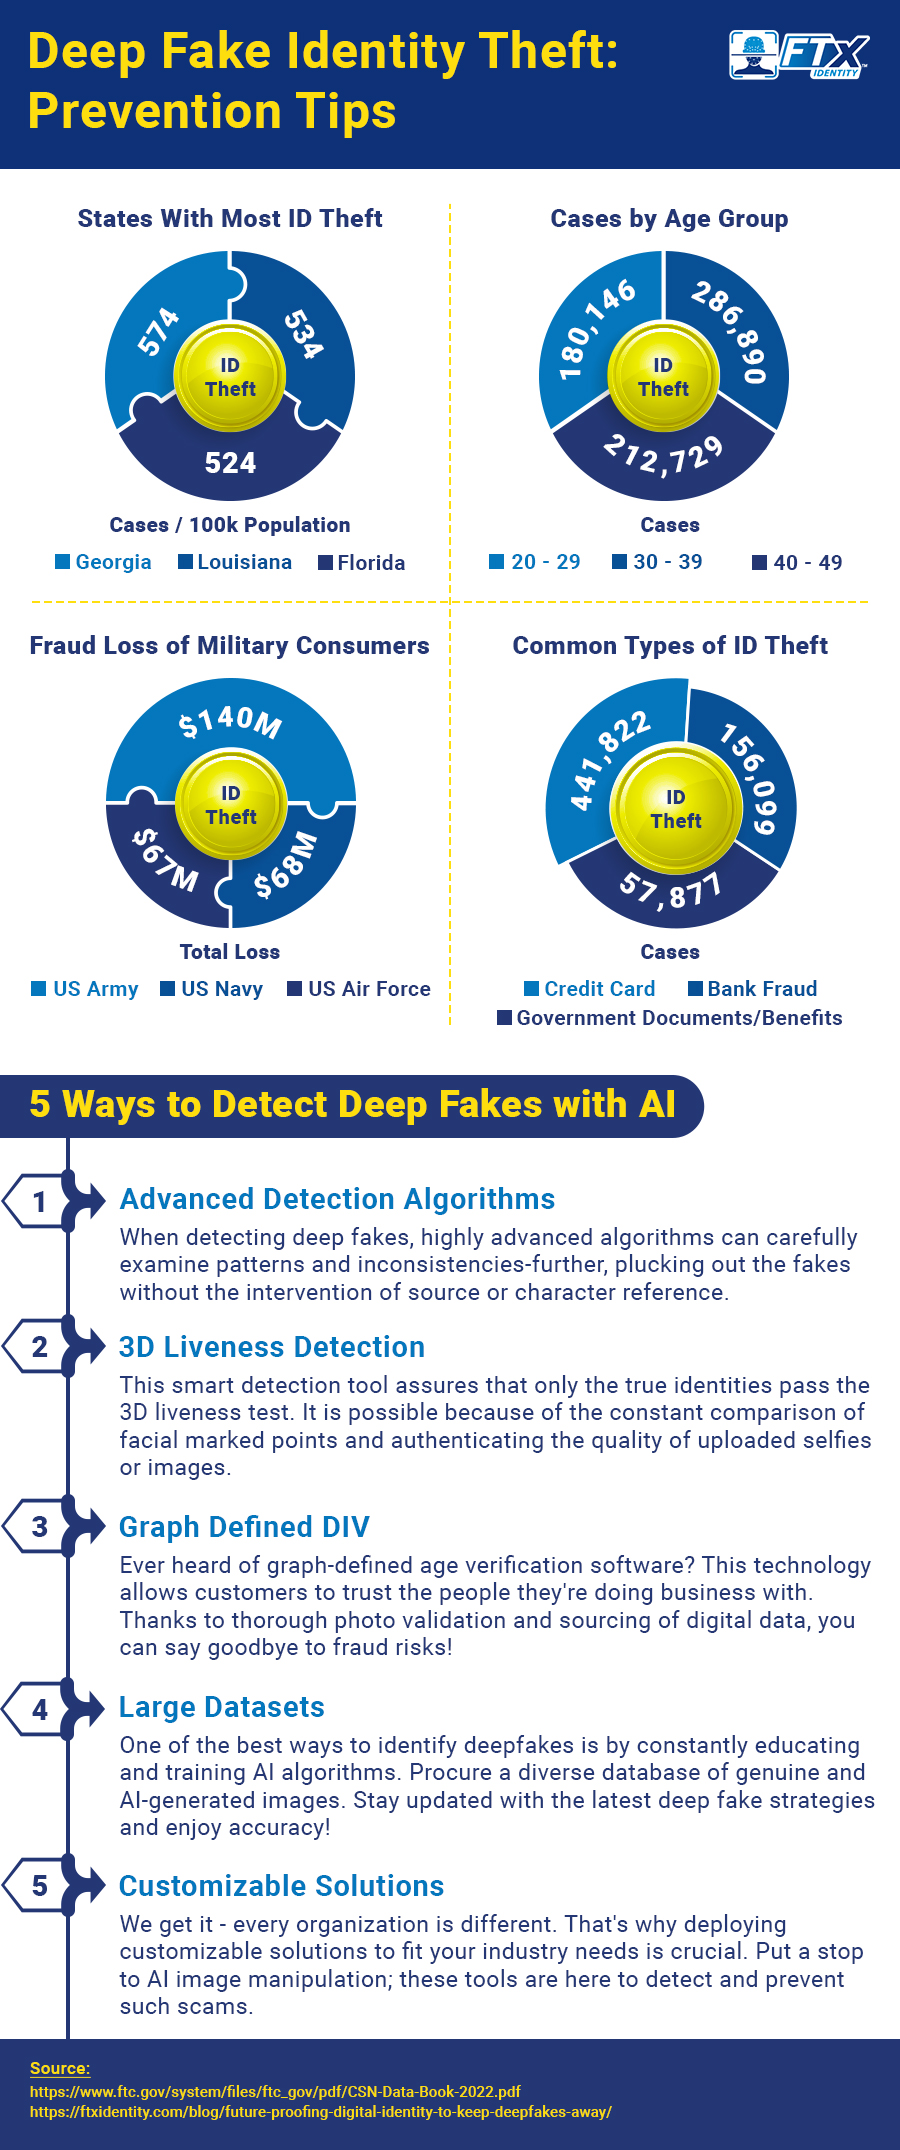 5-Features-that-Can-Stop-Deepfake-Identity-Theft